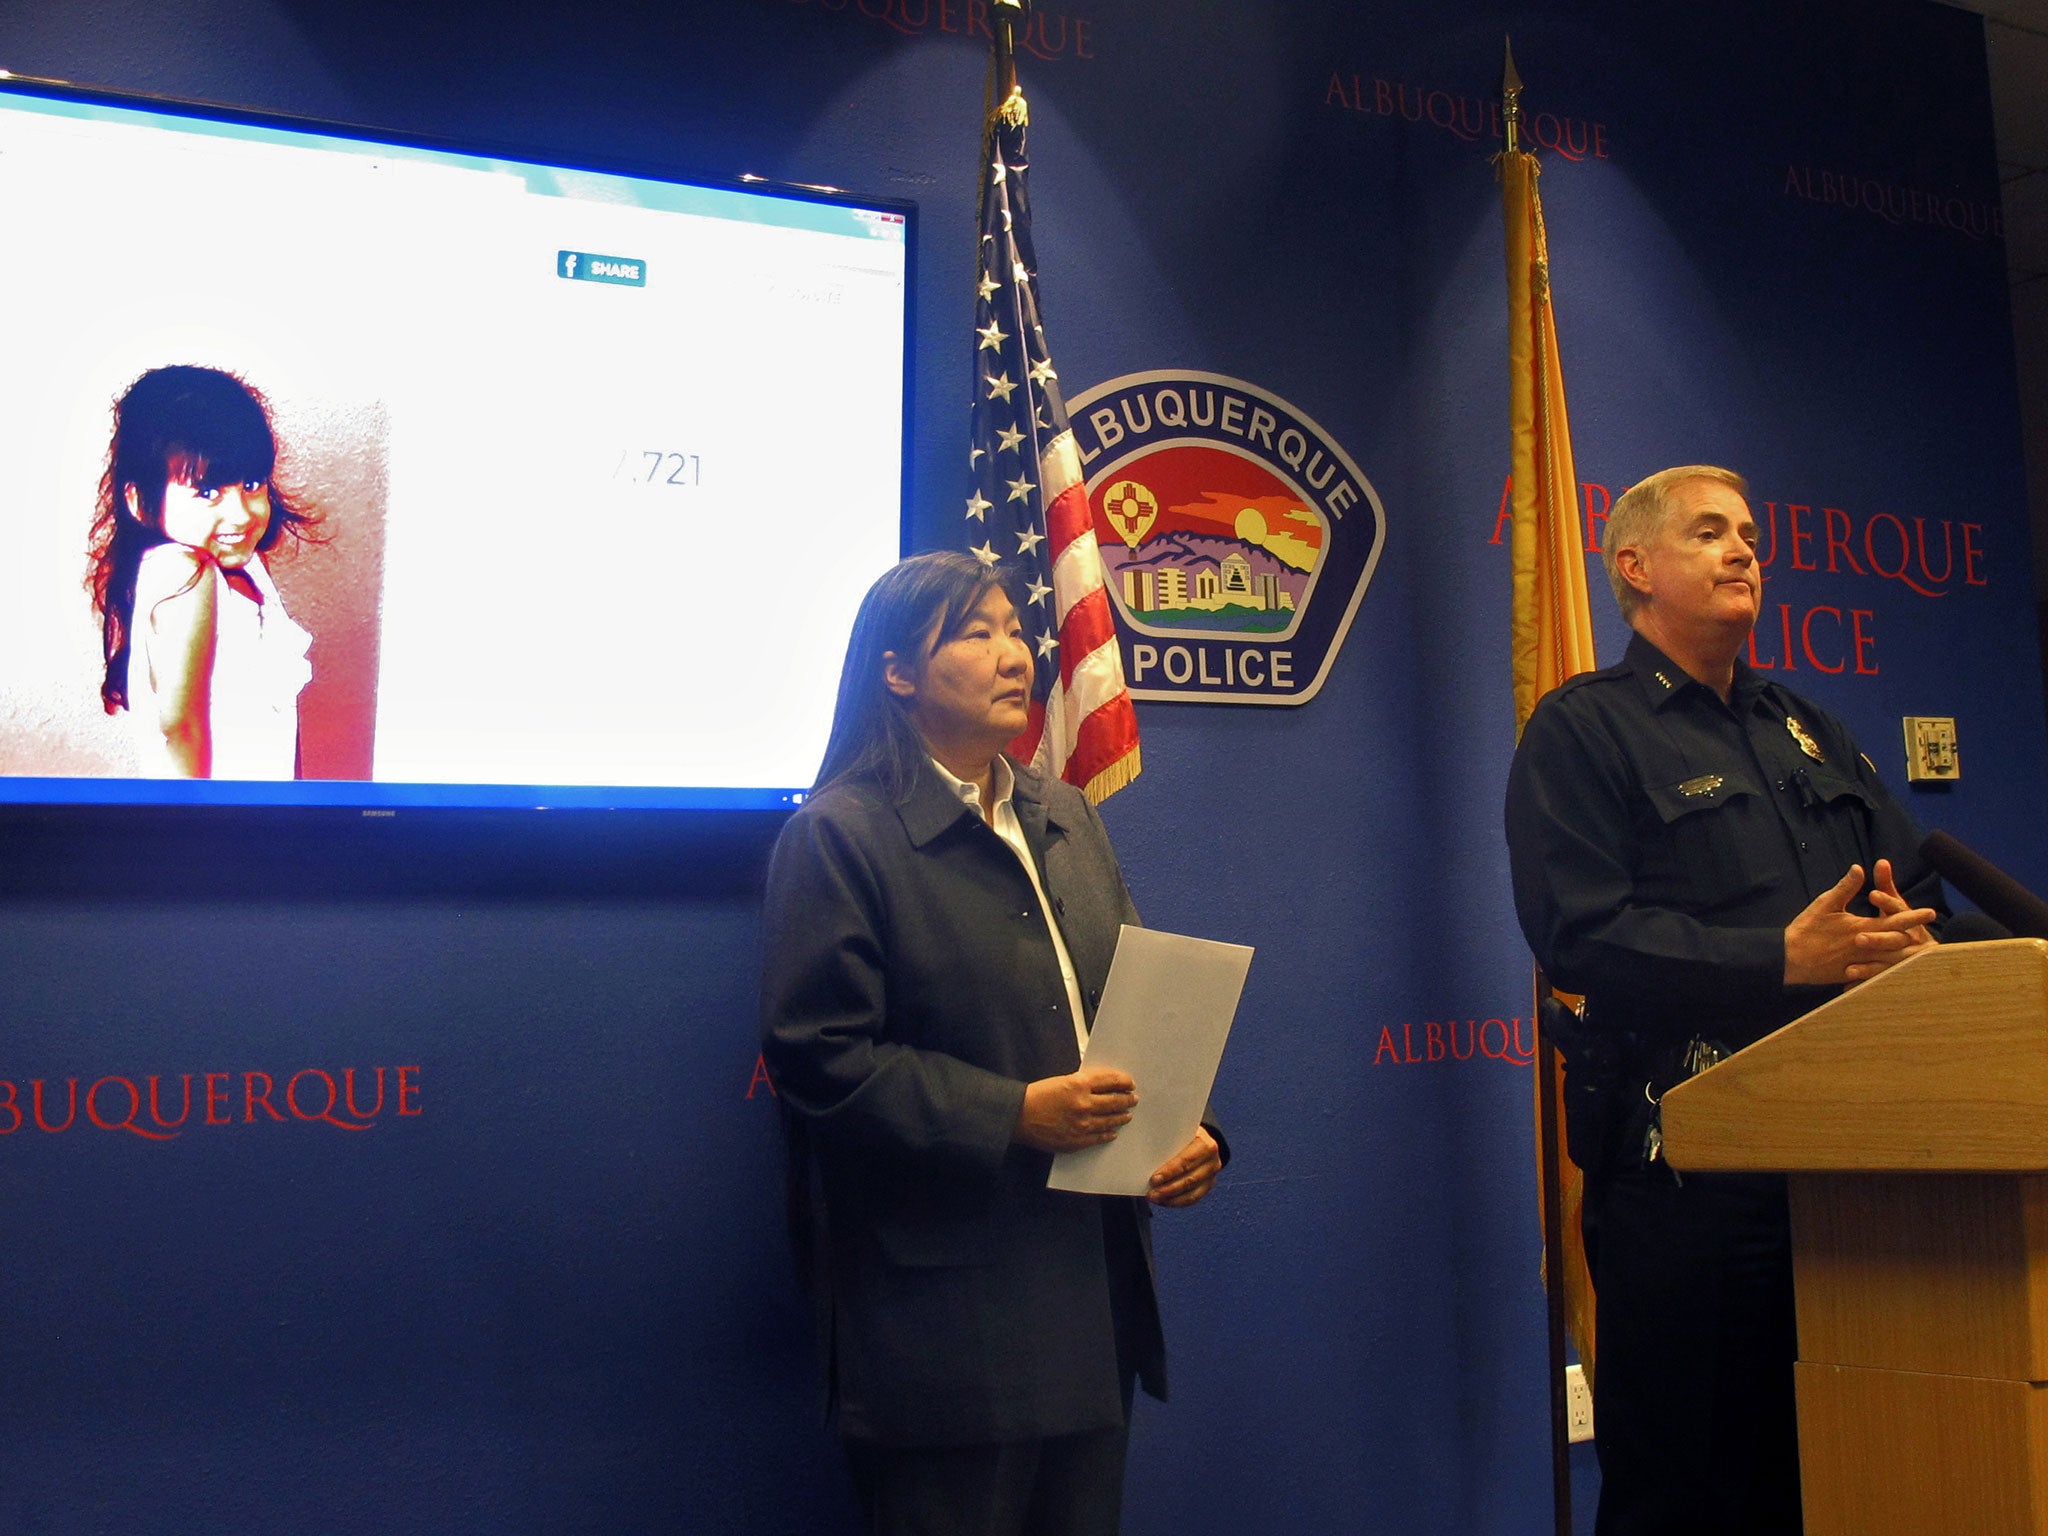 The FBI and Albuquerque Police Department addressed the media on Wednesday